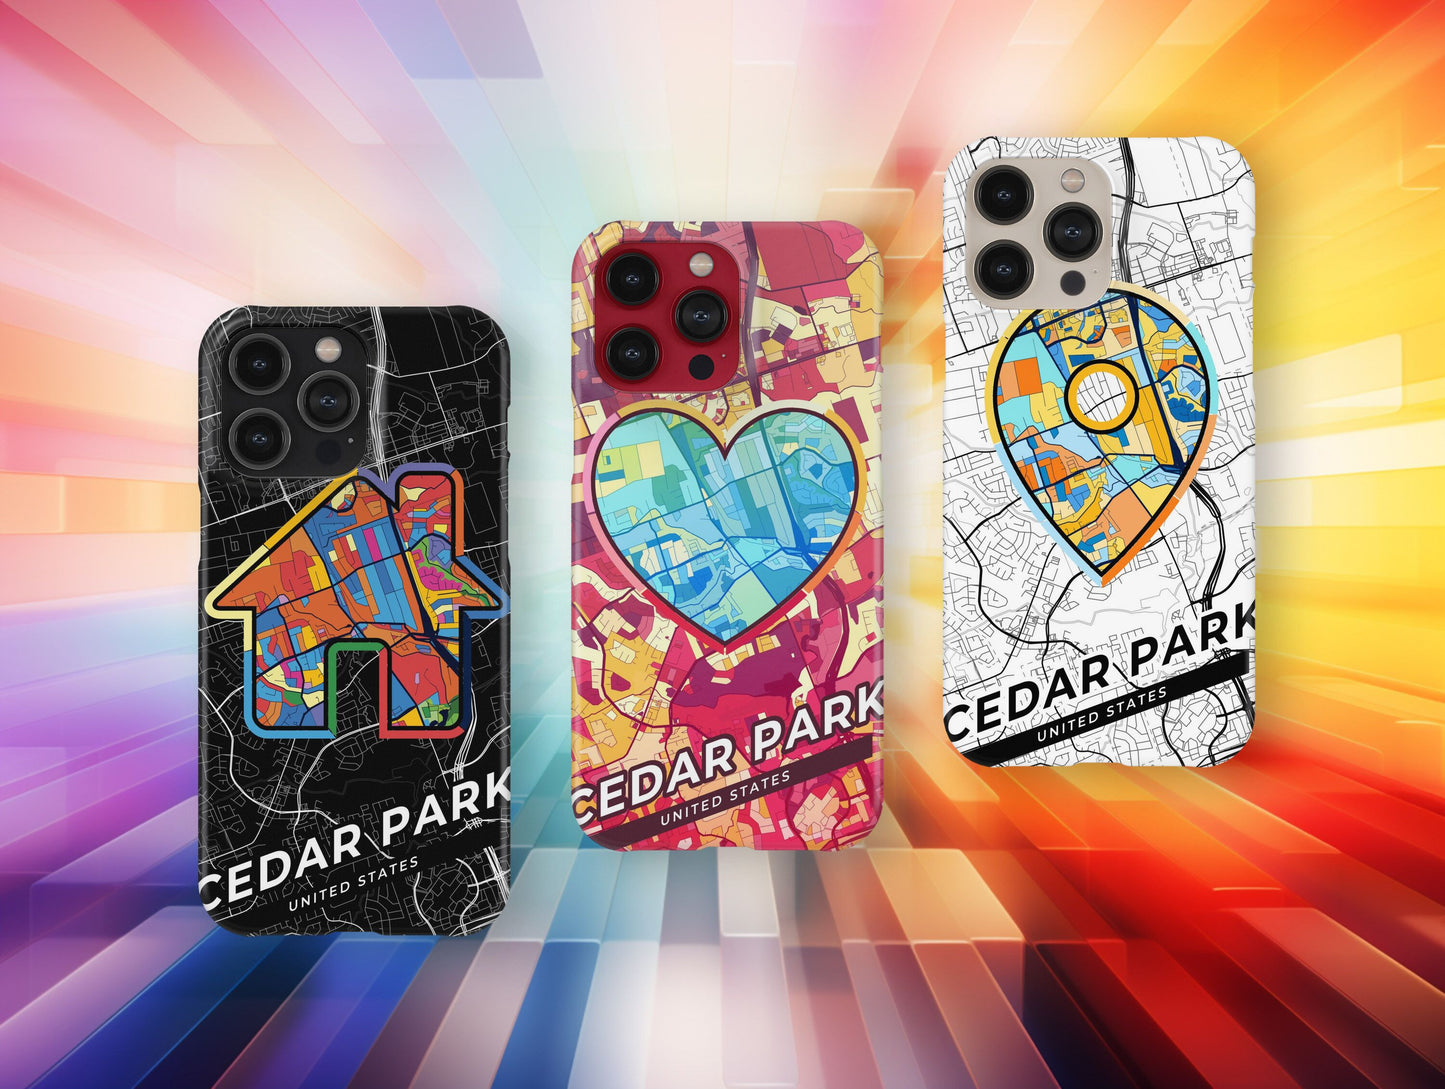 Cedar Park Texas slim phone case with colorful icon. Birthday, wedding or housewarming gift. Couple match cases.